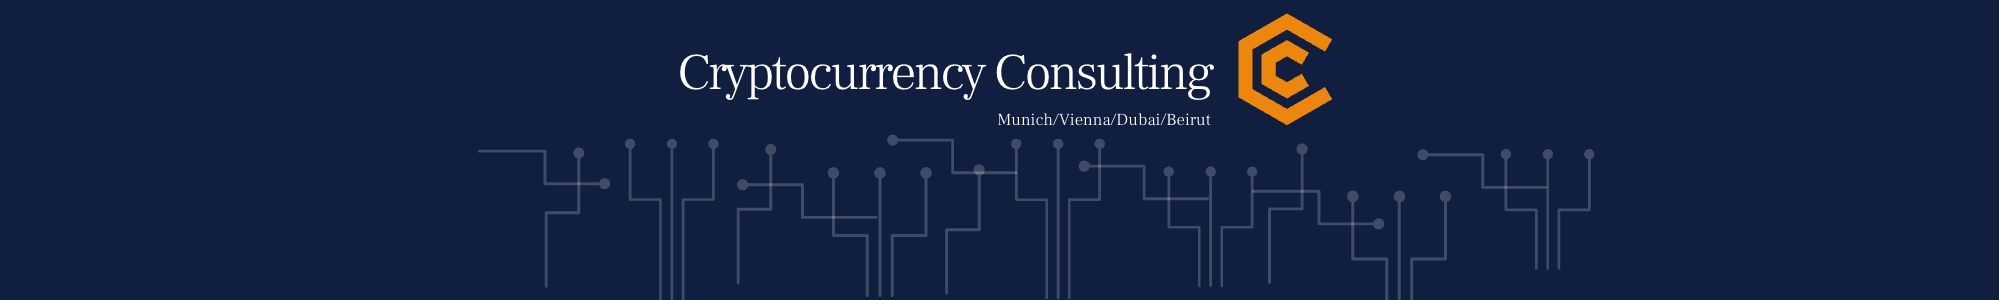 Cryptocurrencyconsulting banner